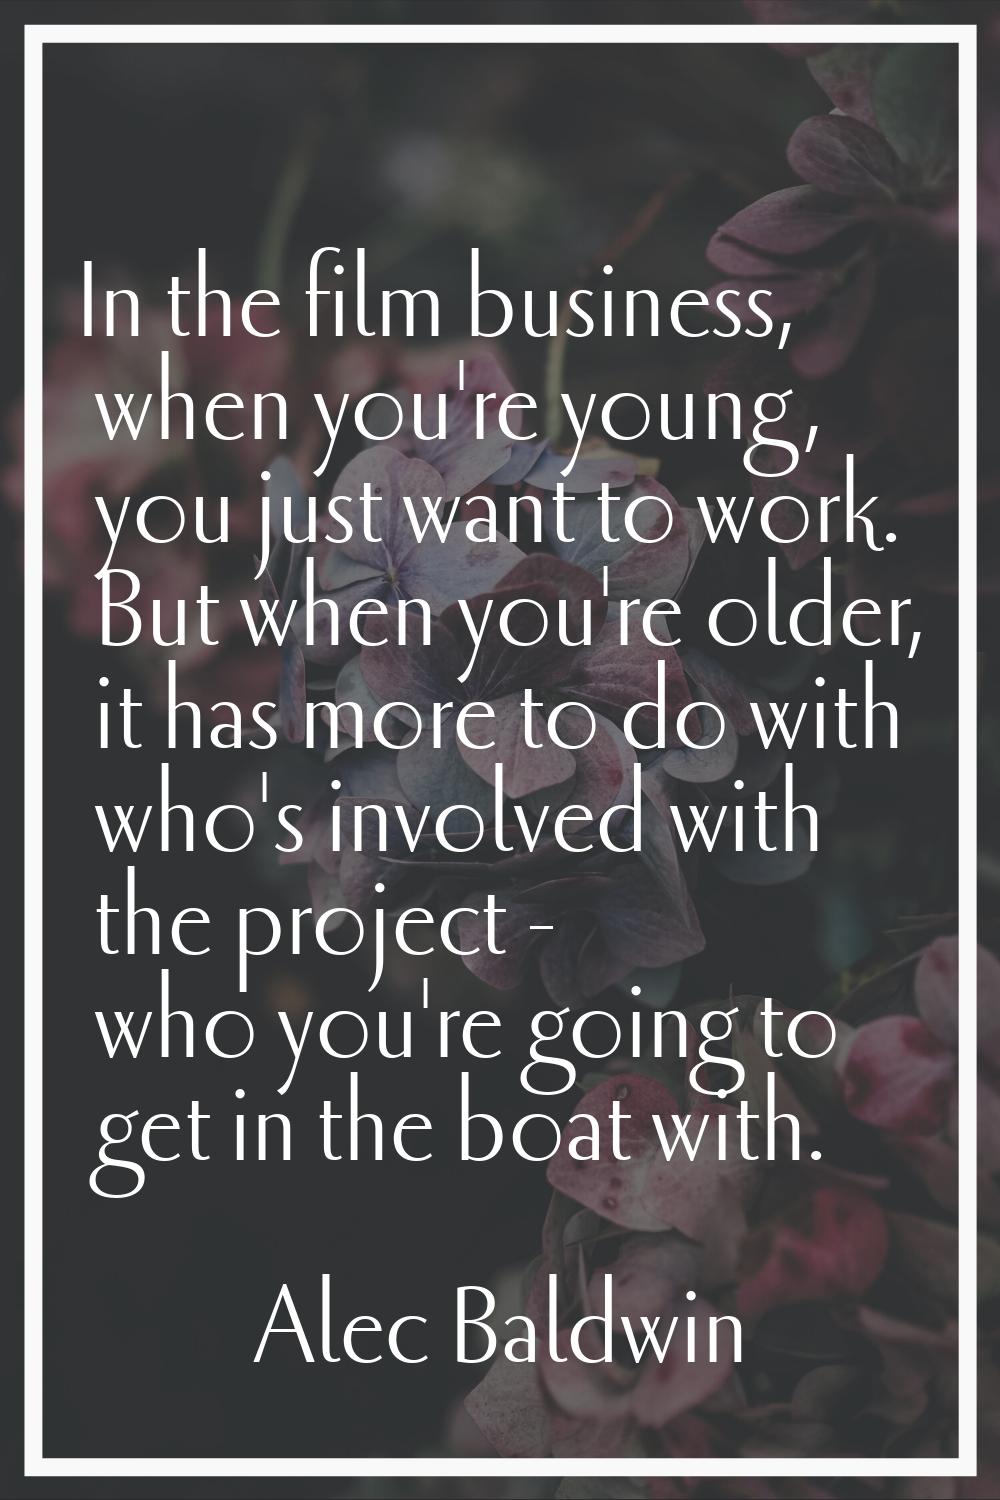 In the film business, when you're young, you just want to work. But when you're older, it has more 